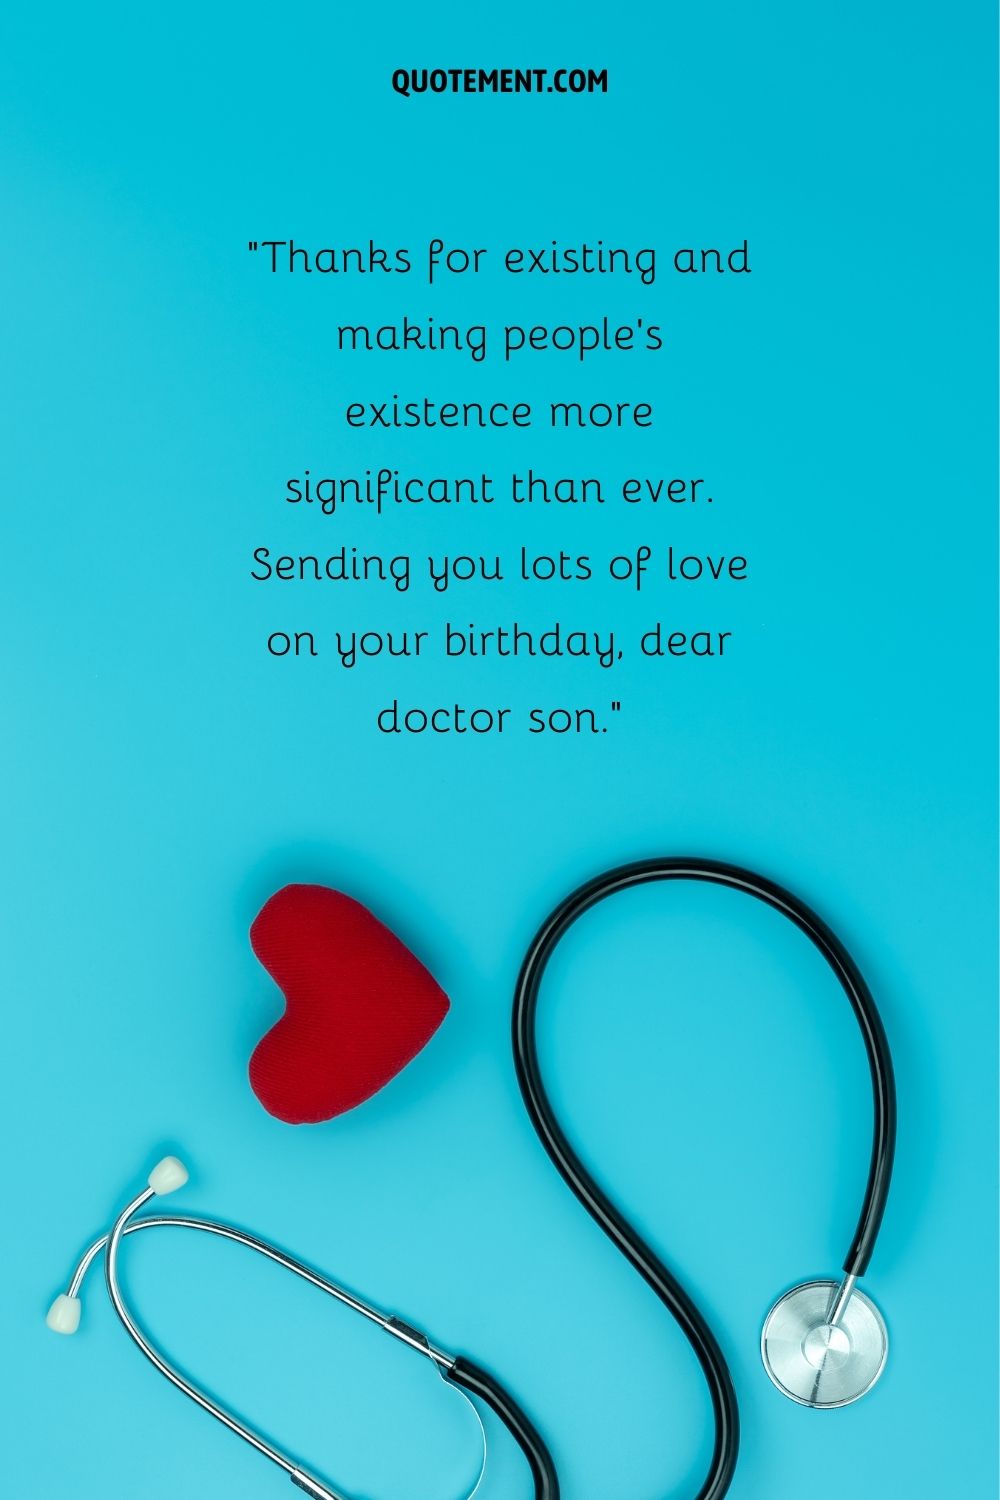 dear doctor son birthday wishes representing birthday wishes dr